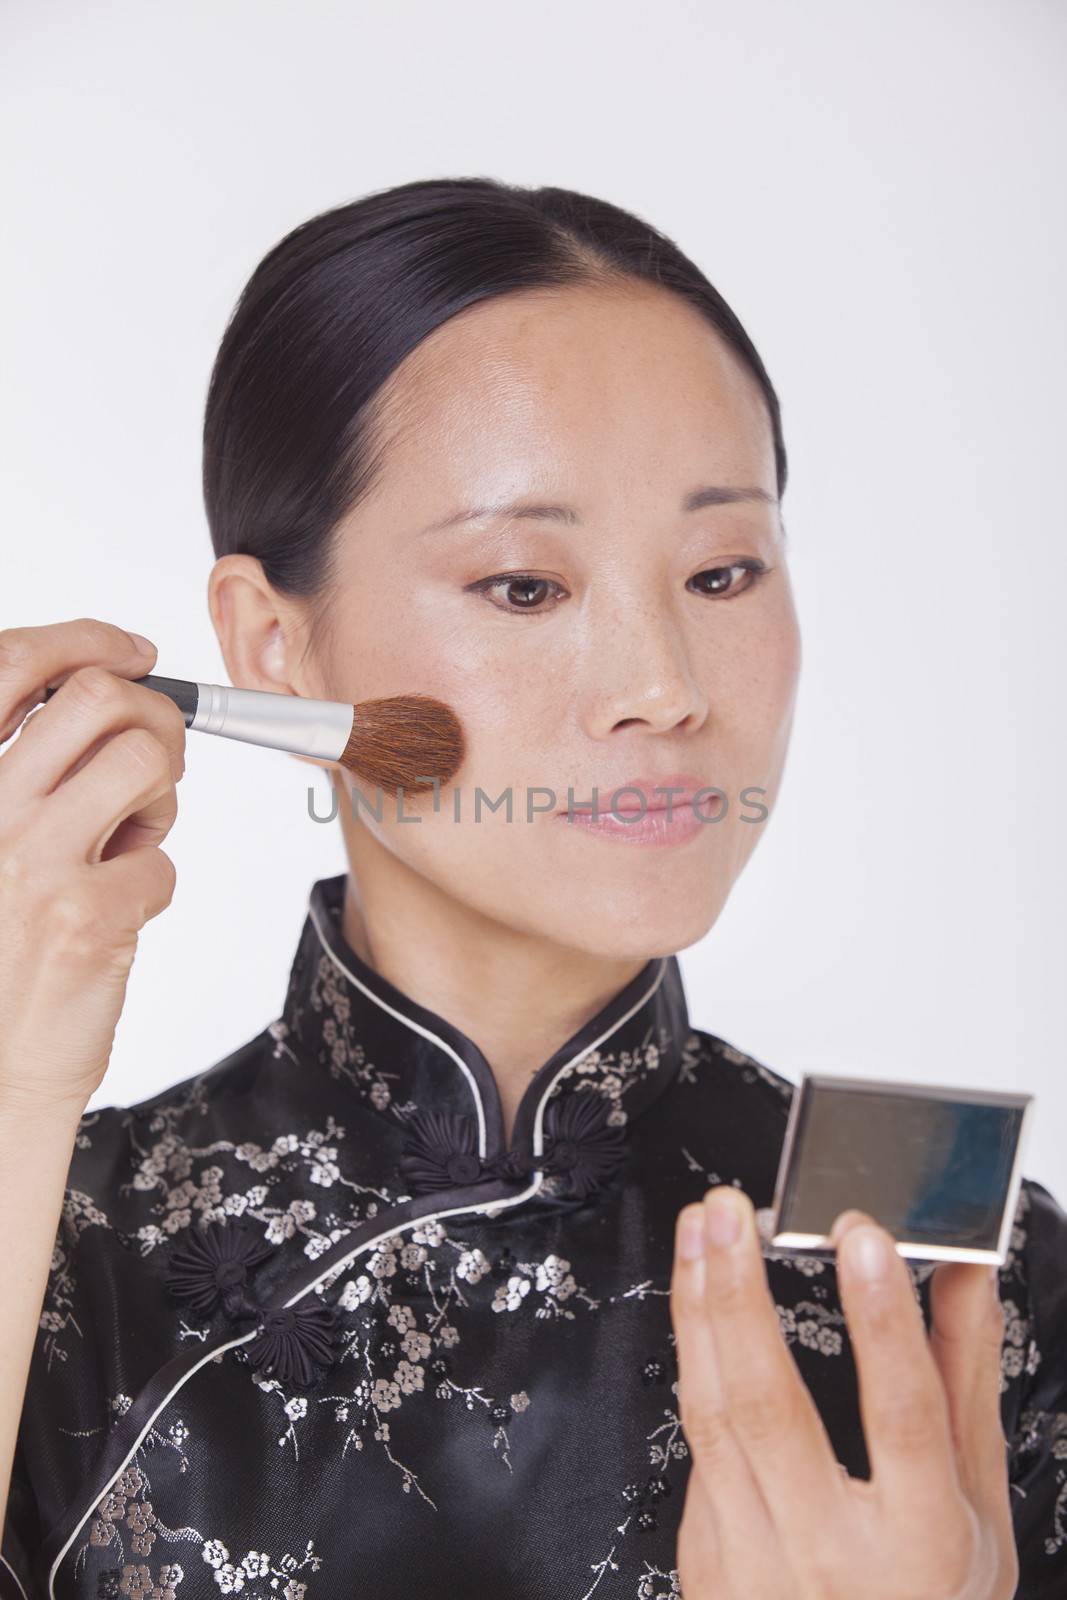 Woman in traditional clothing looking into a mirror and applying make up with a make up brush, studio shot